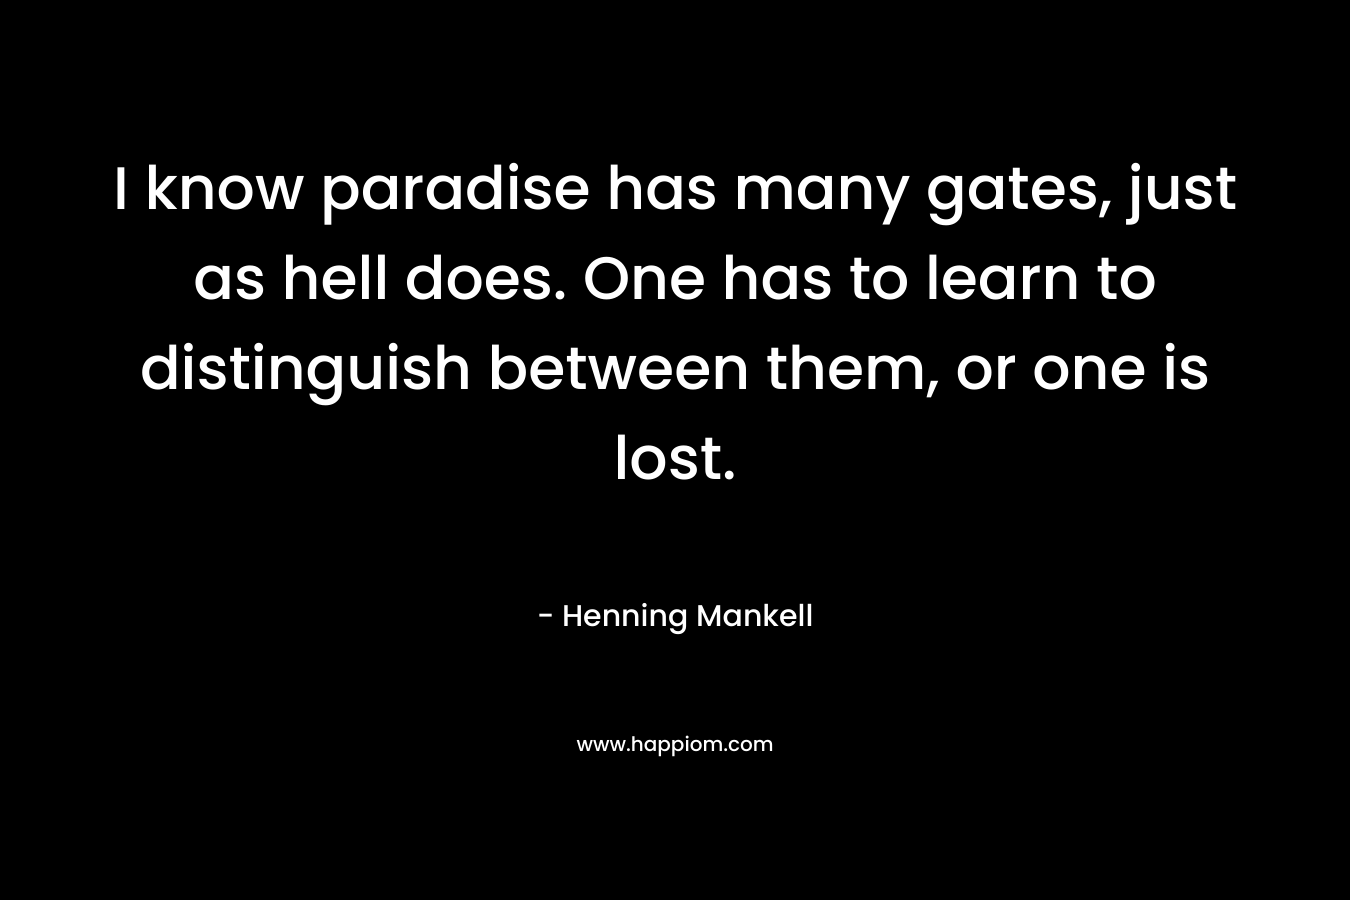 I know paradise has many gates, just as hell does. One has to learn to distinguish between them, or one is lost. – Henning Mankell